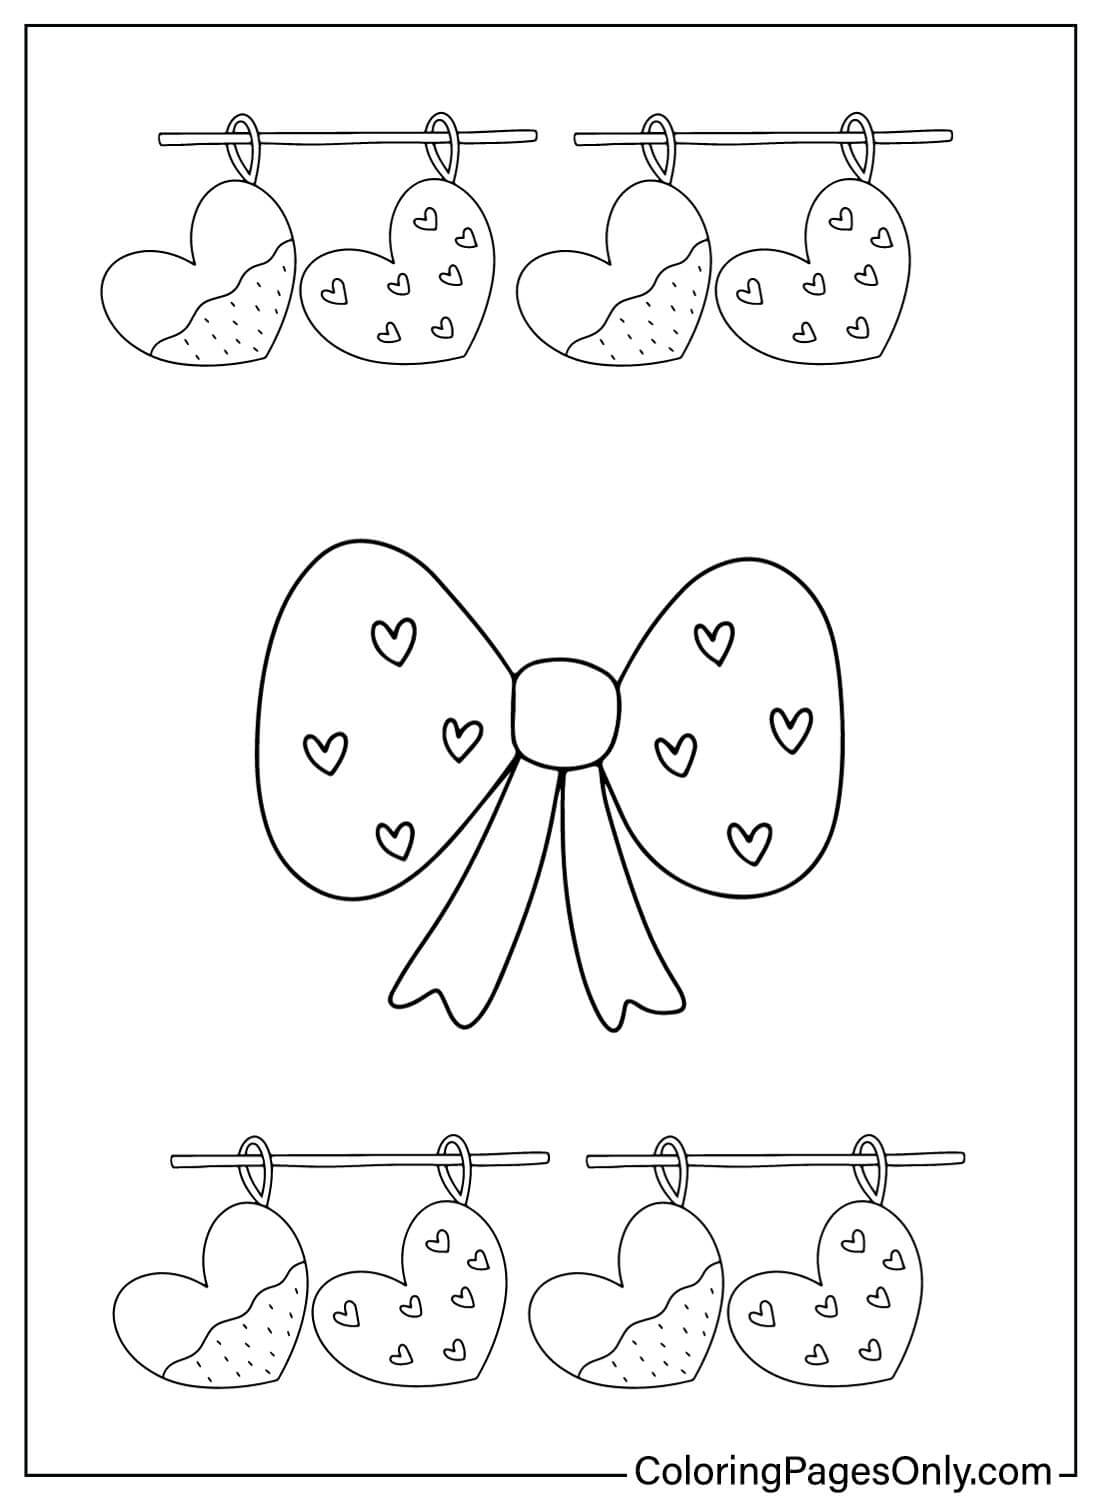 Coloring Sheets Bow from Bow